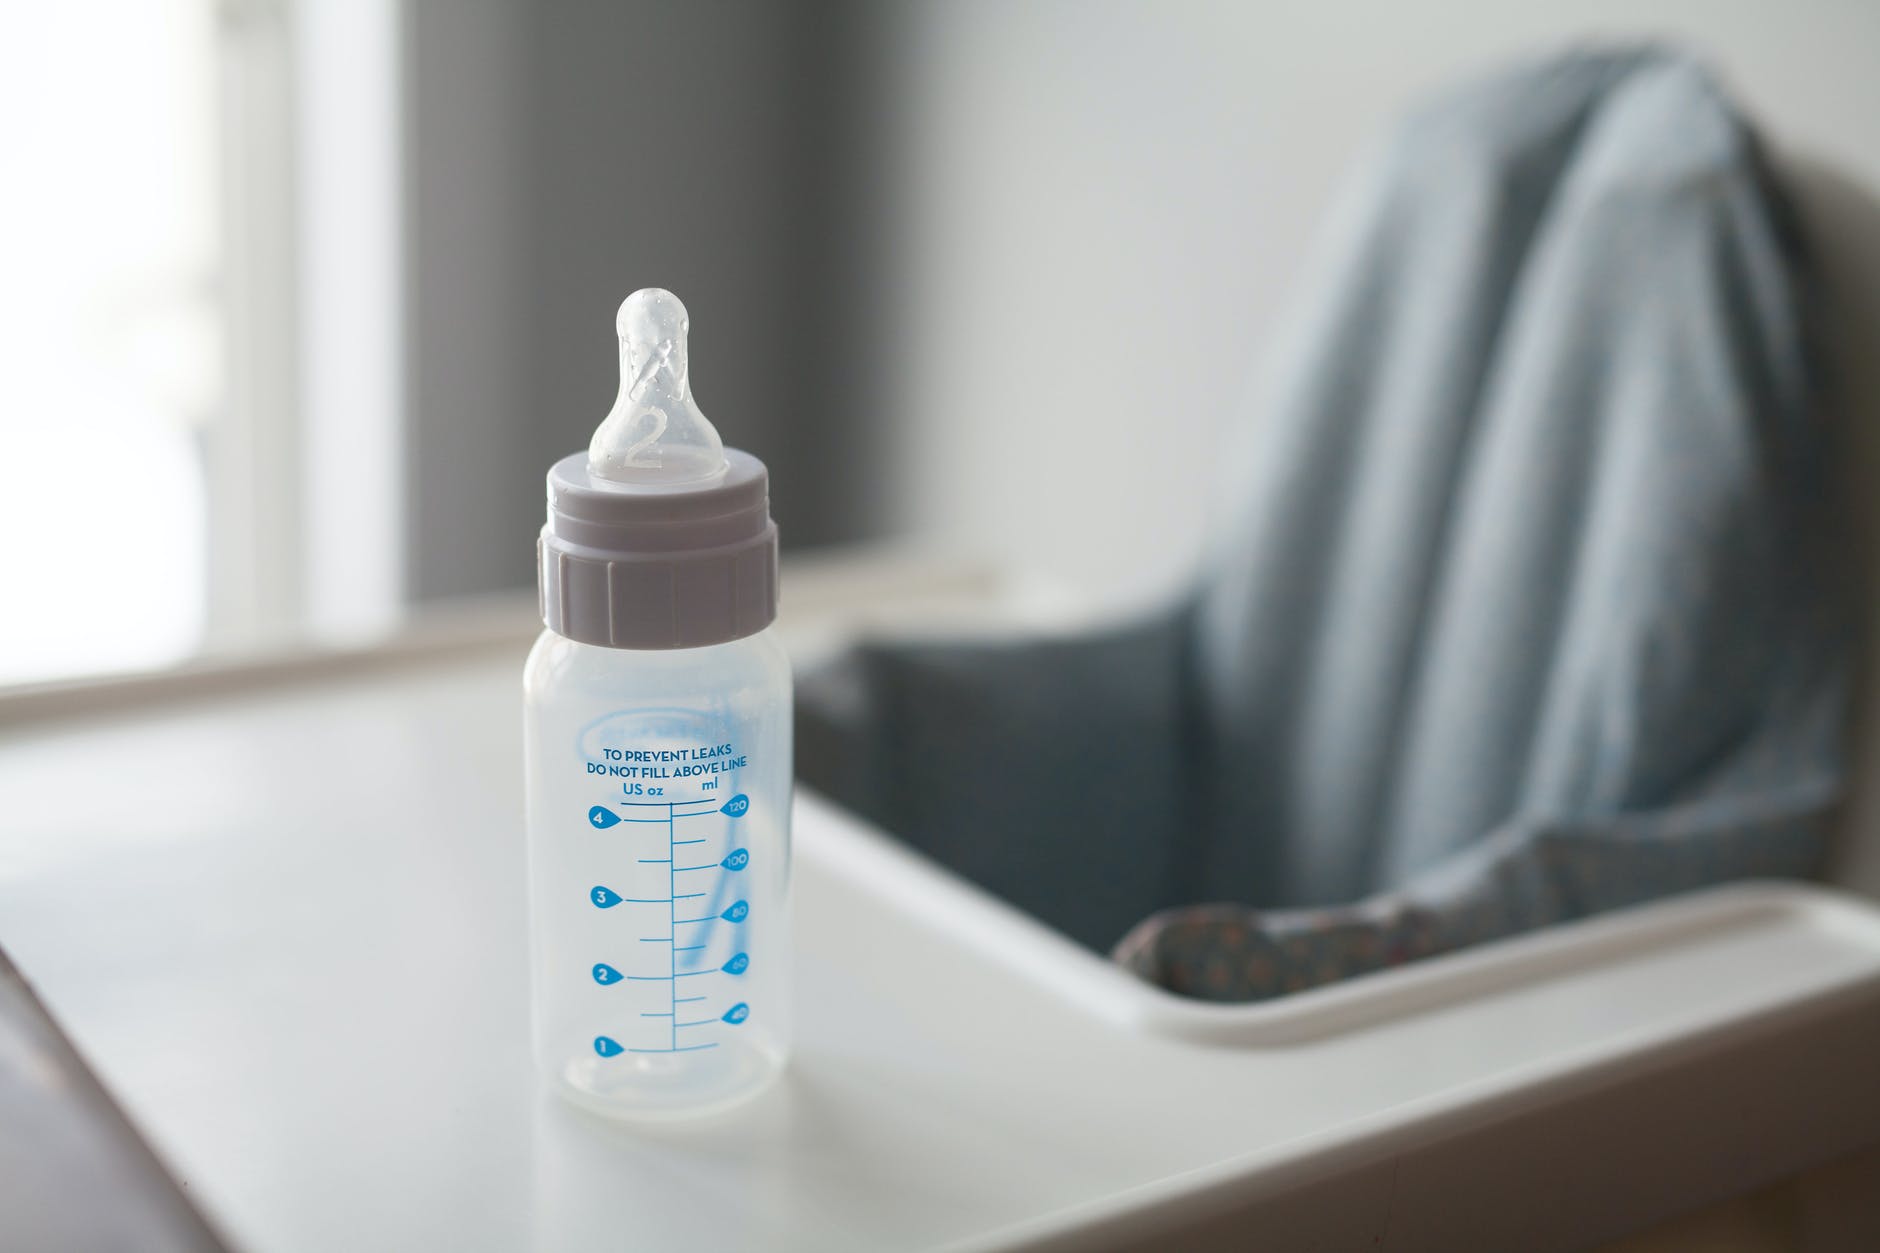 Toxic Baby Formula Linked to NEC in New Study